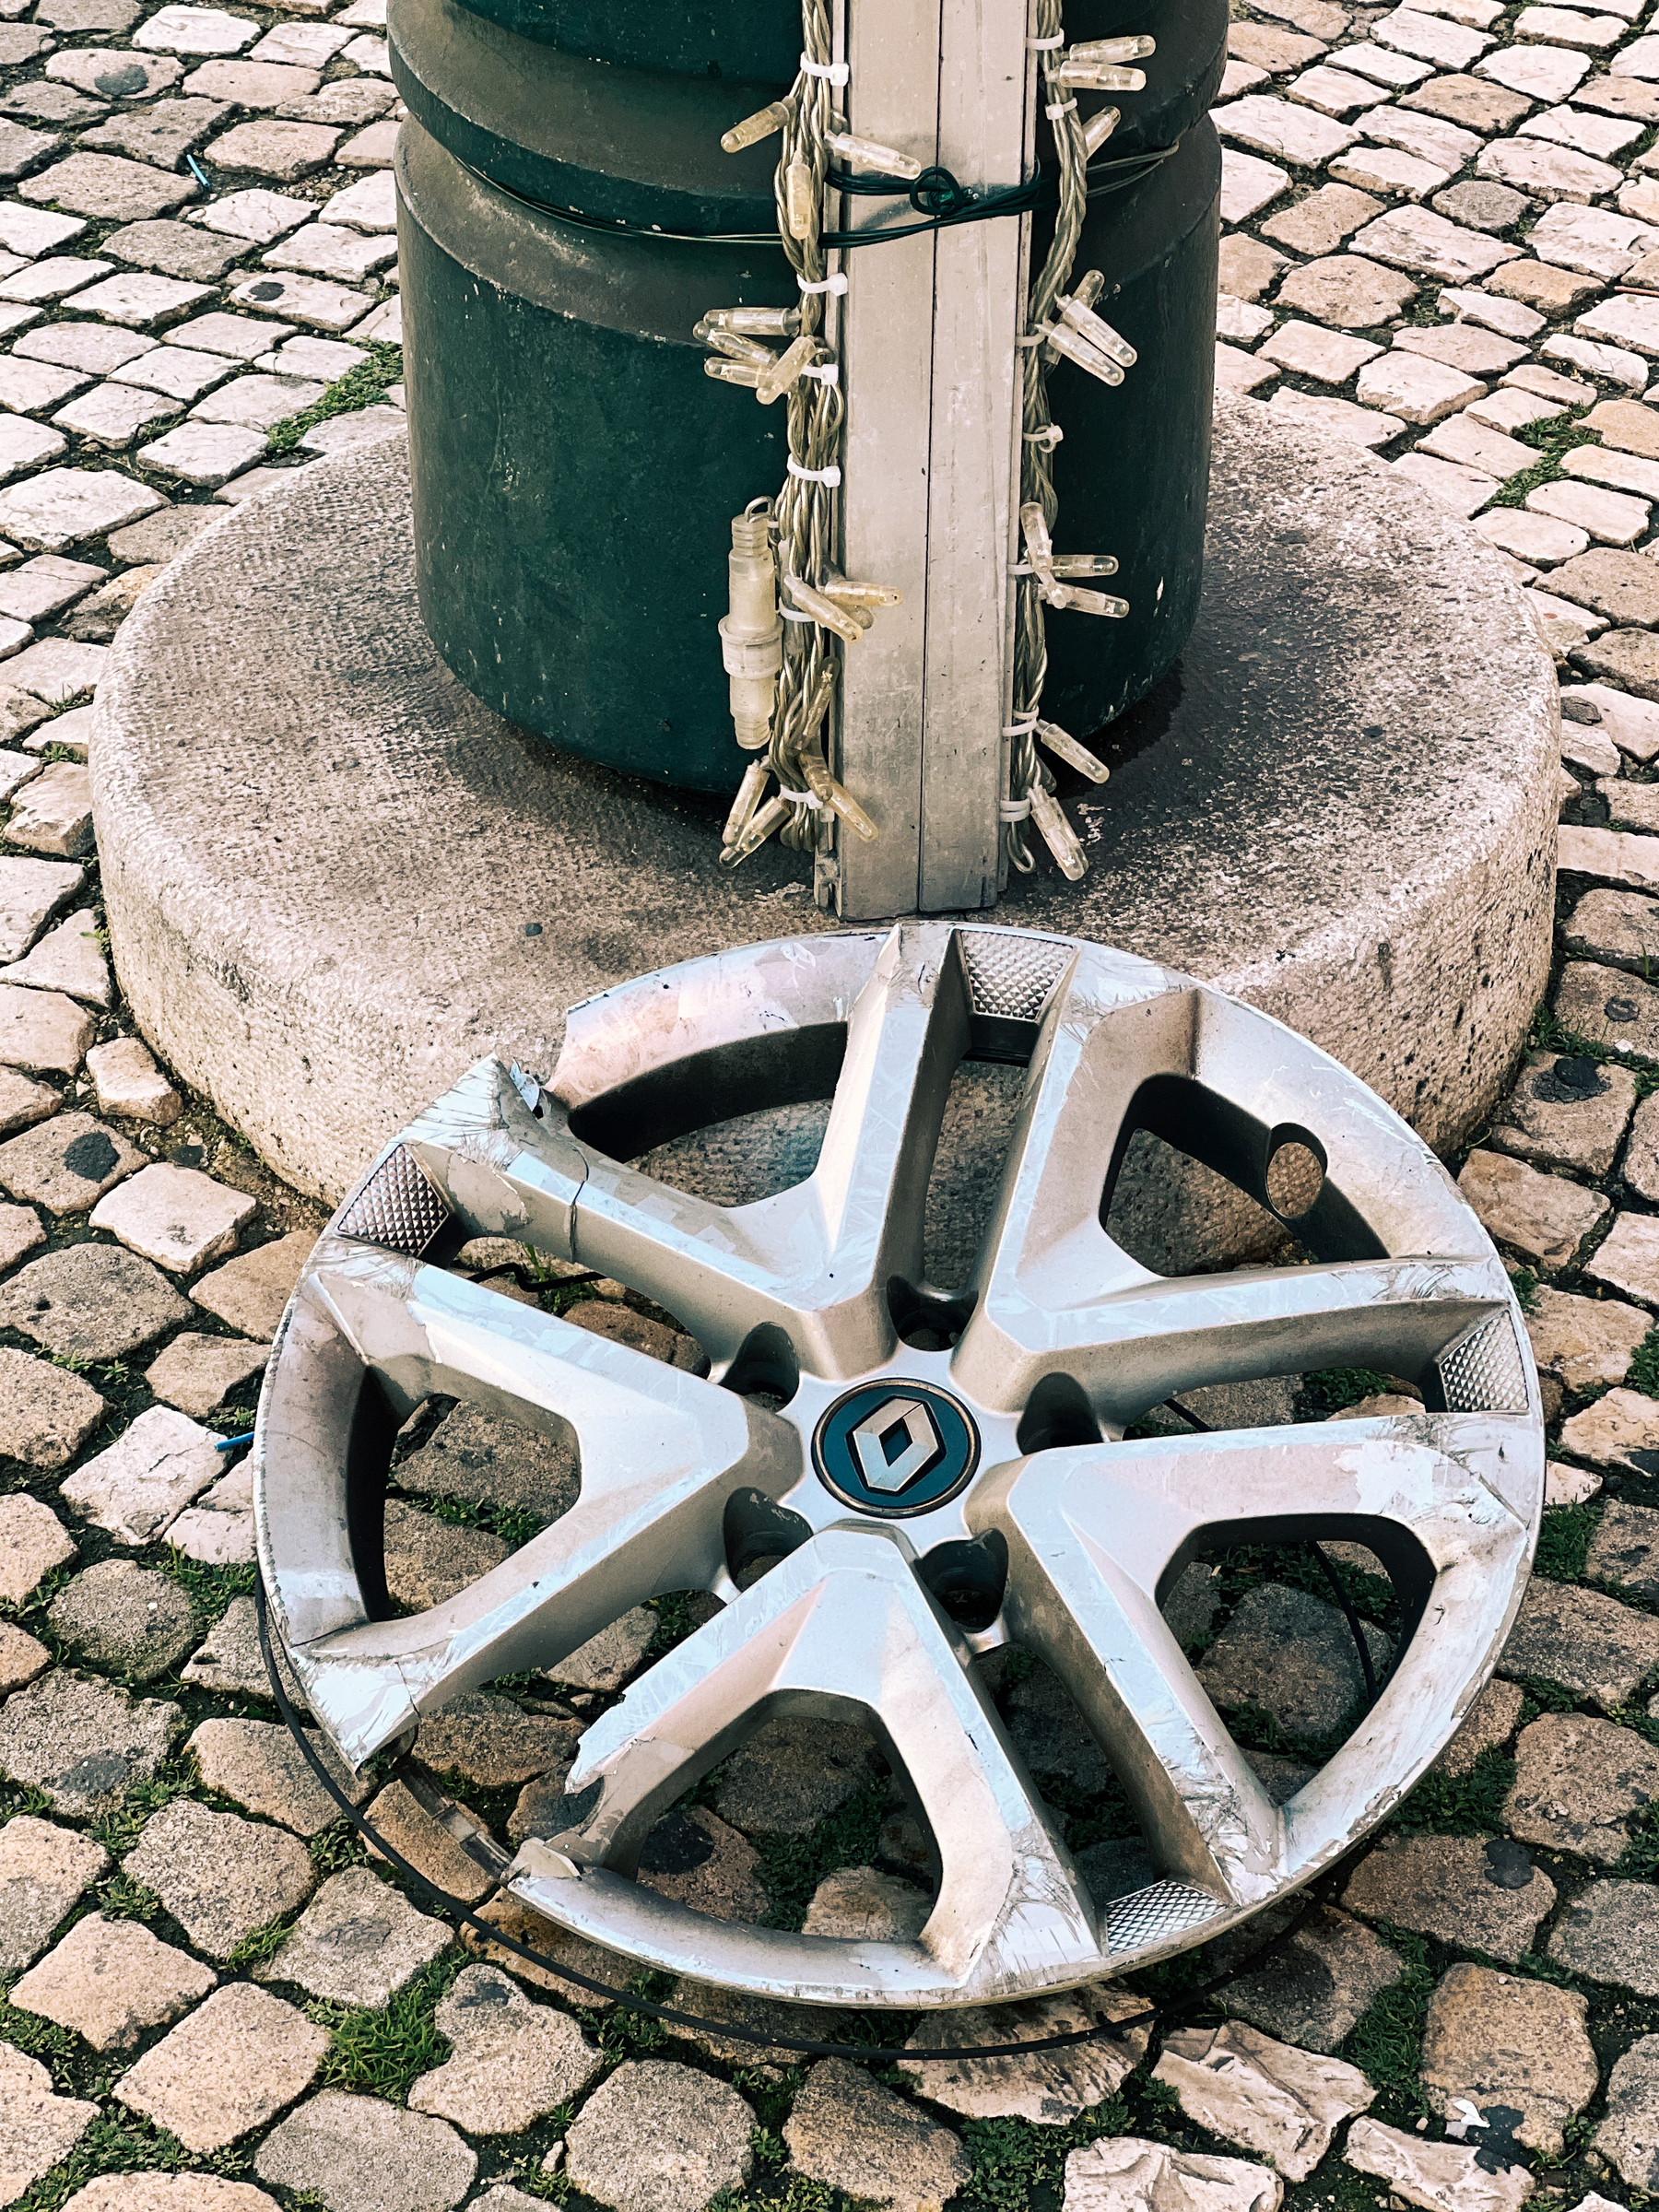 A wheel rim abandoned on the ground.